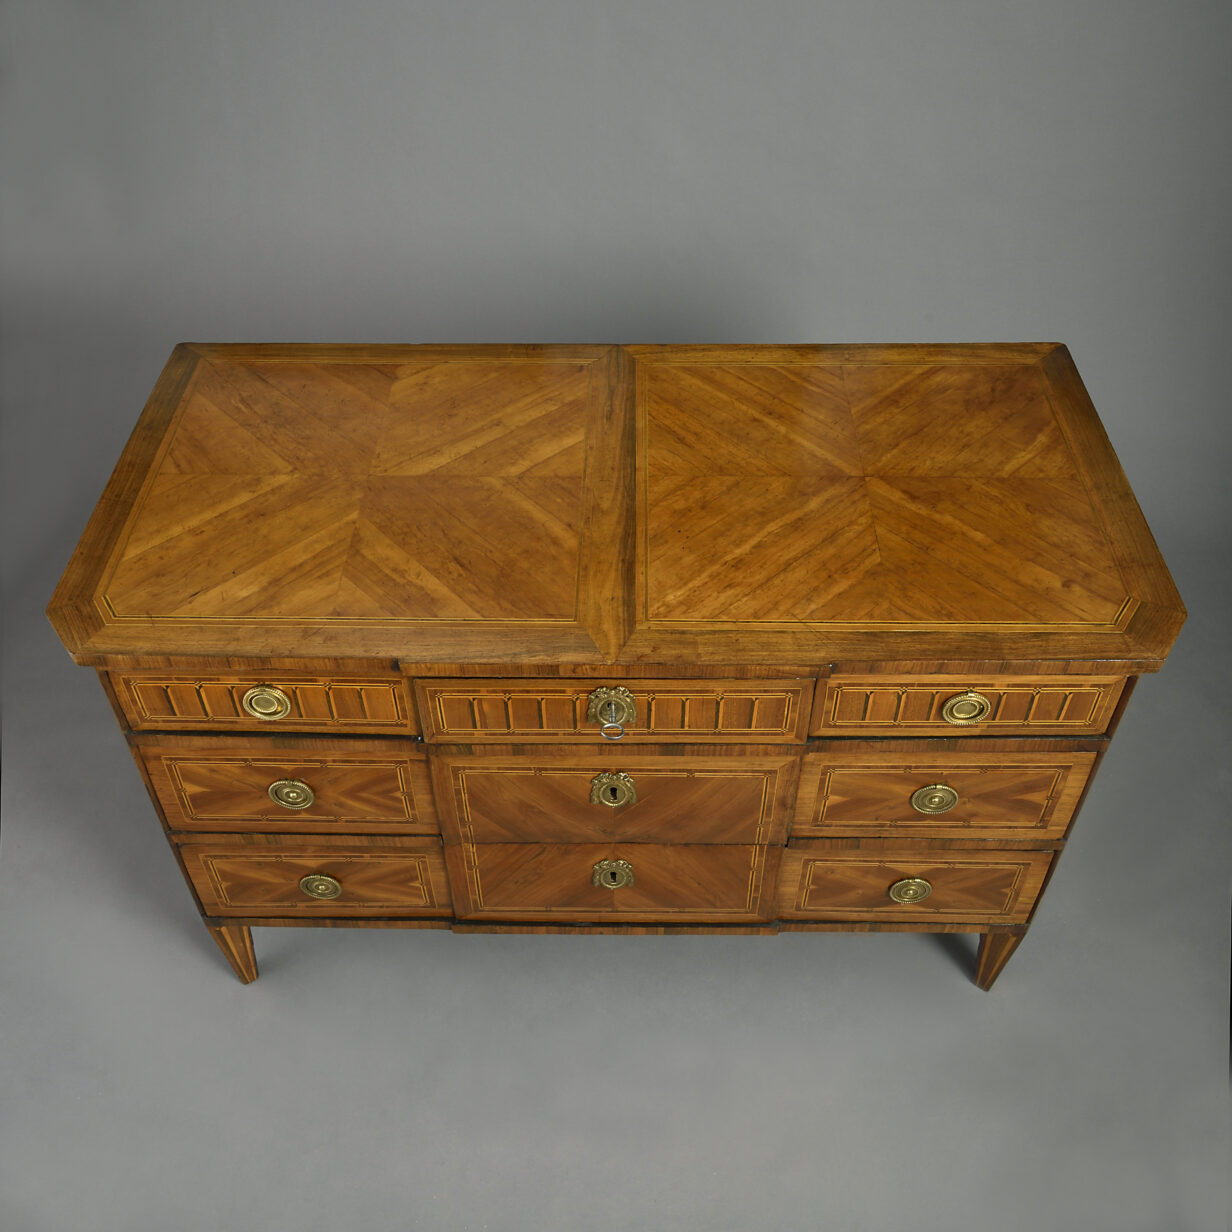 Late 18th century neo-classical parquetry commode